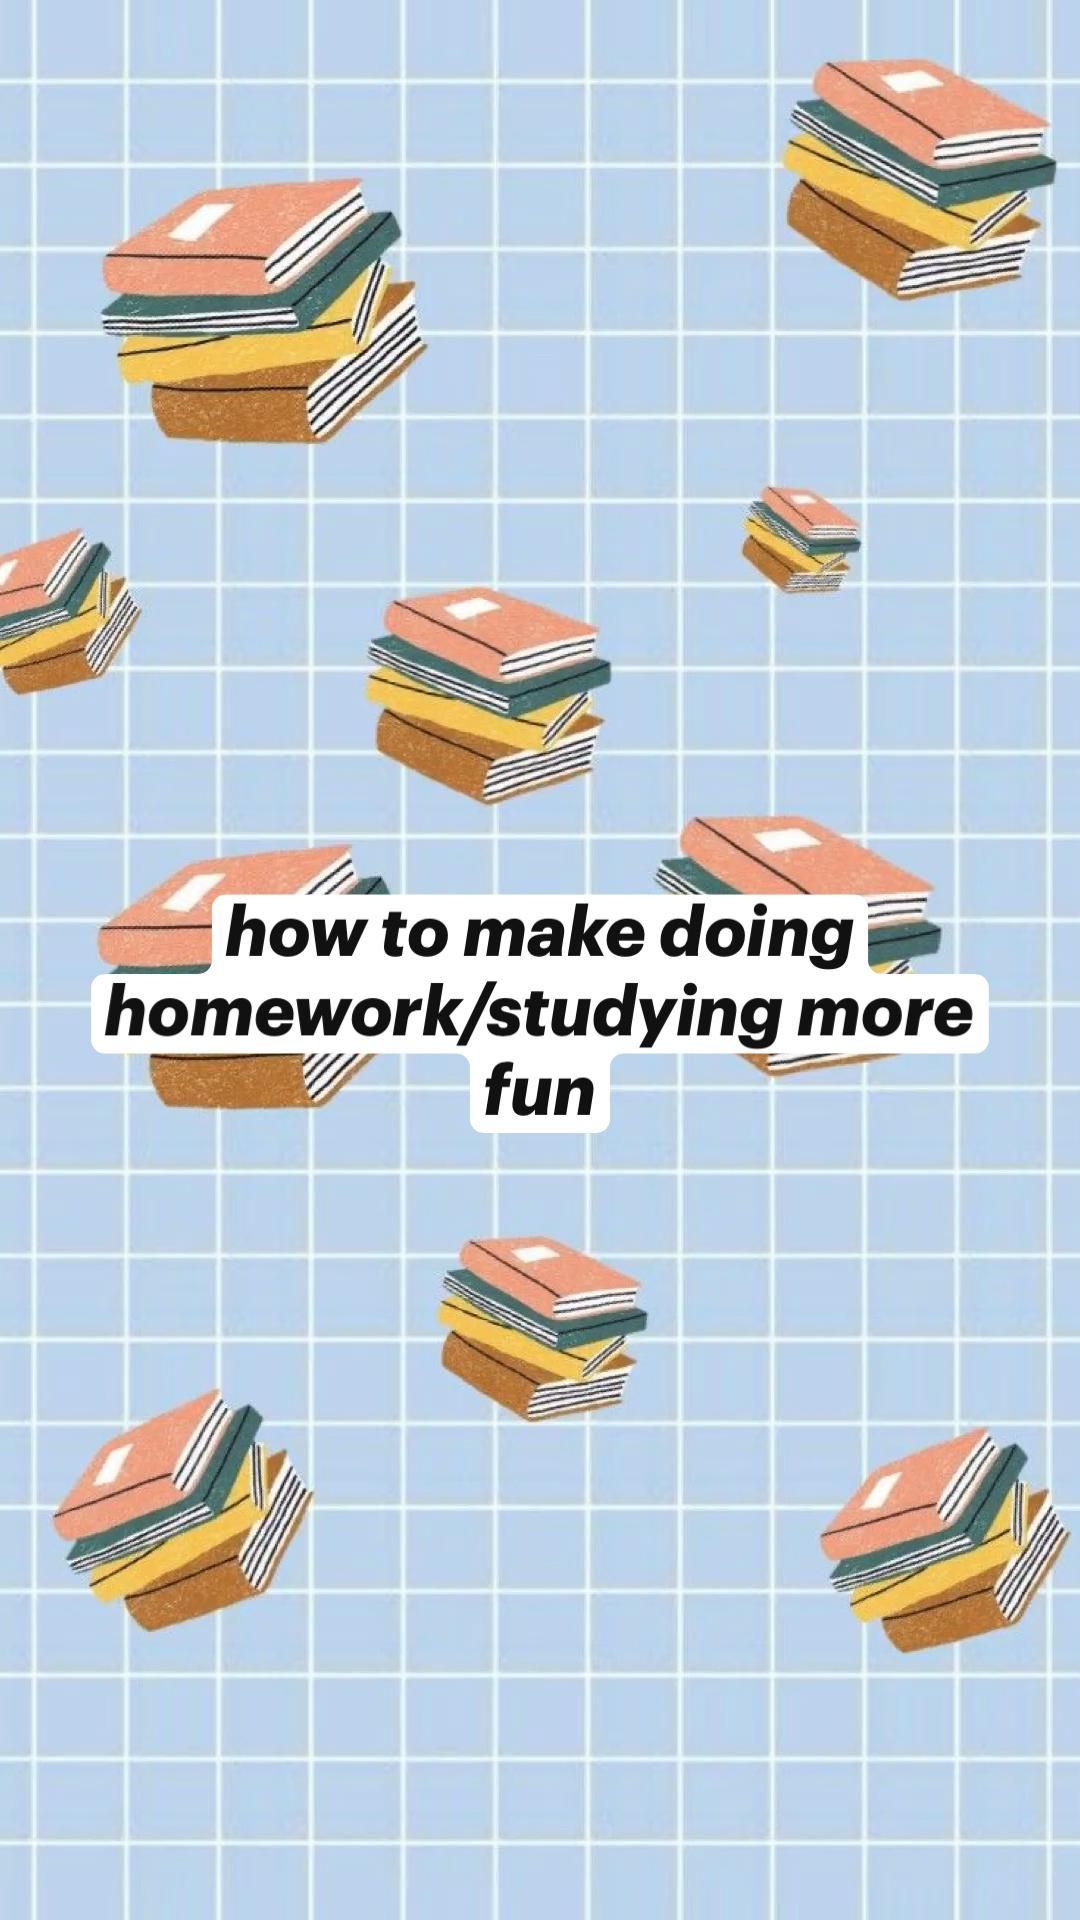 How To Make Doing Homework Studying More Fun. Study Motivation, Inspirational Quotes Wallpaper, Cool Wallpaper For Phones